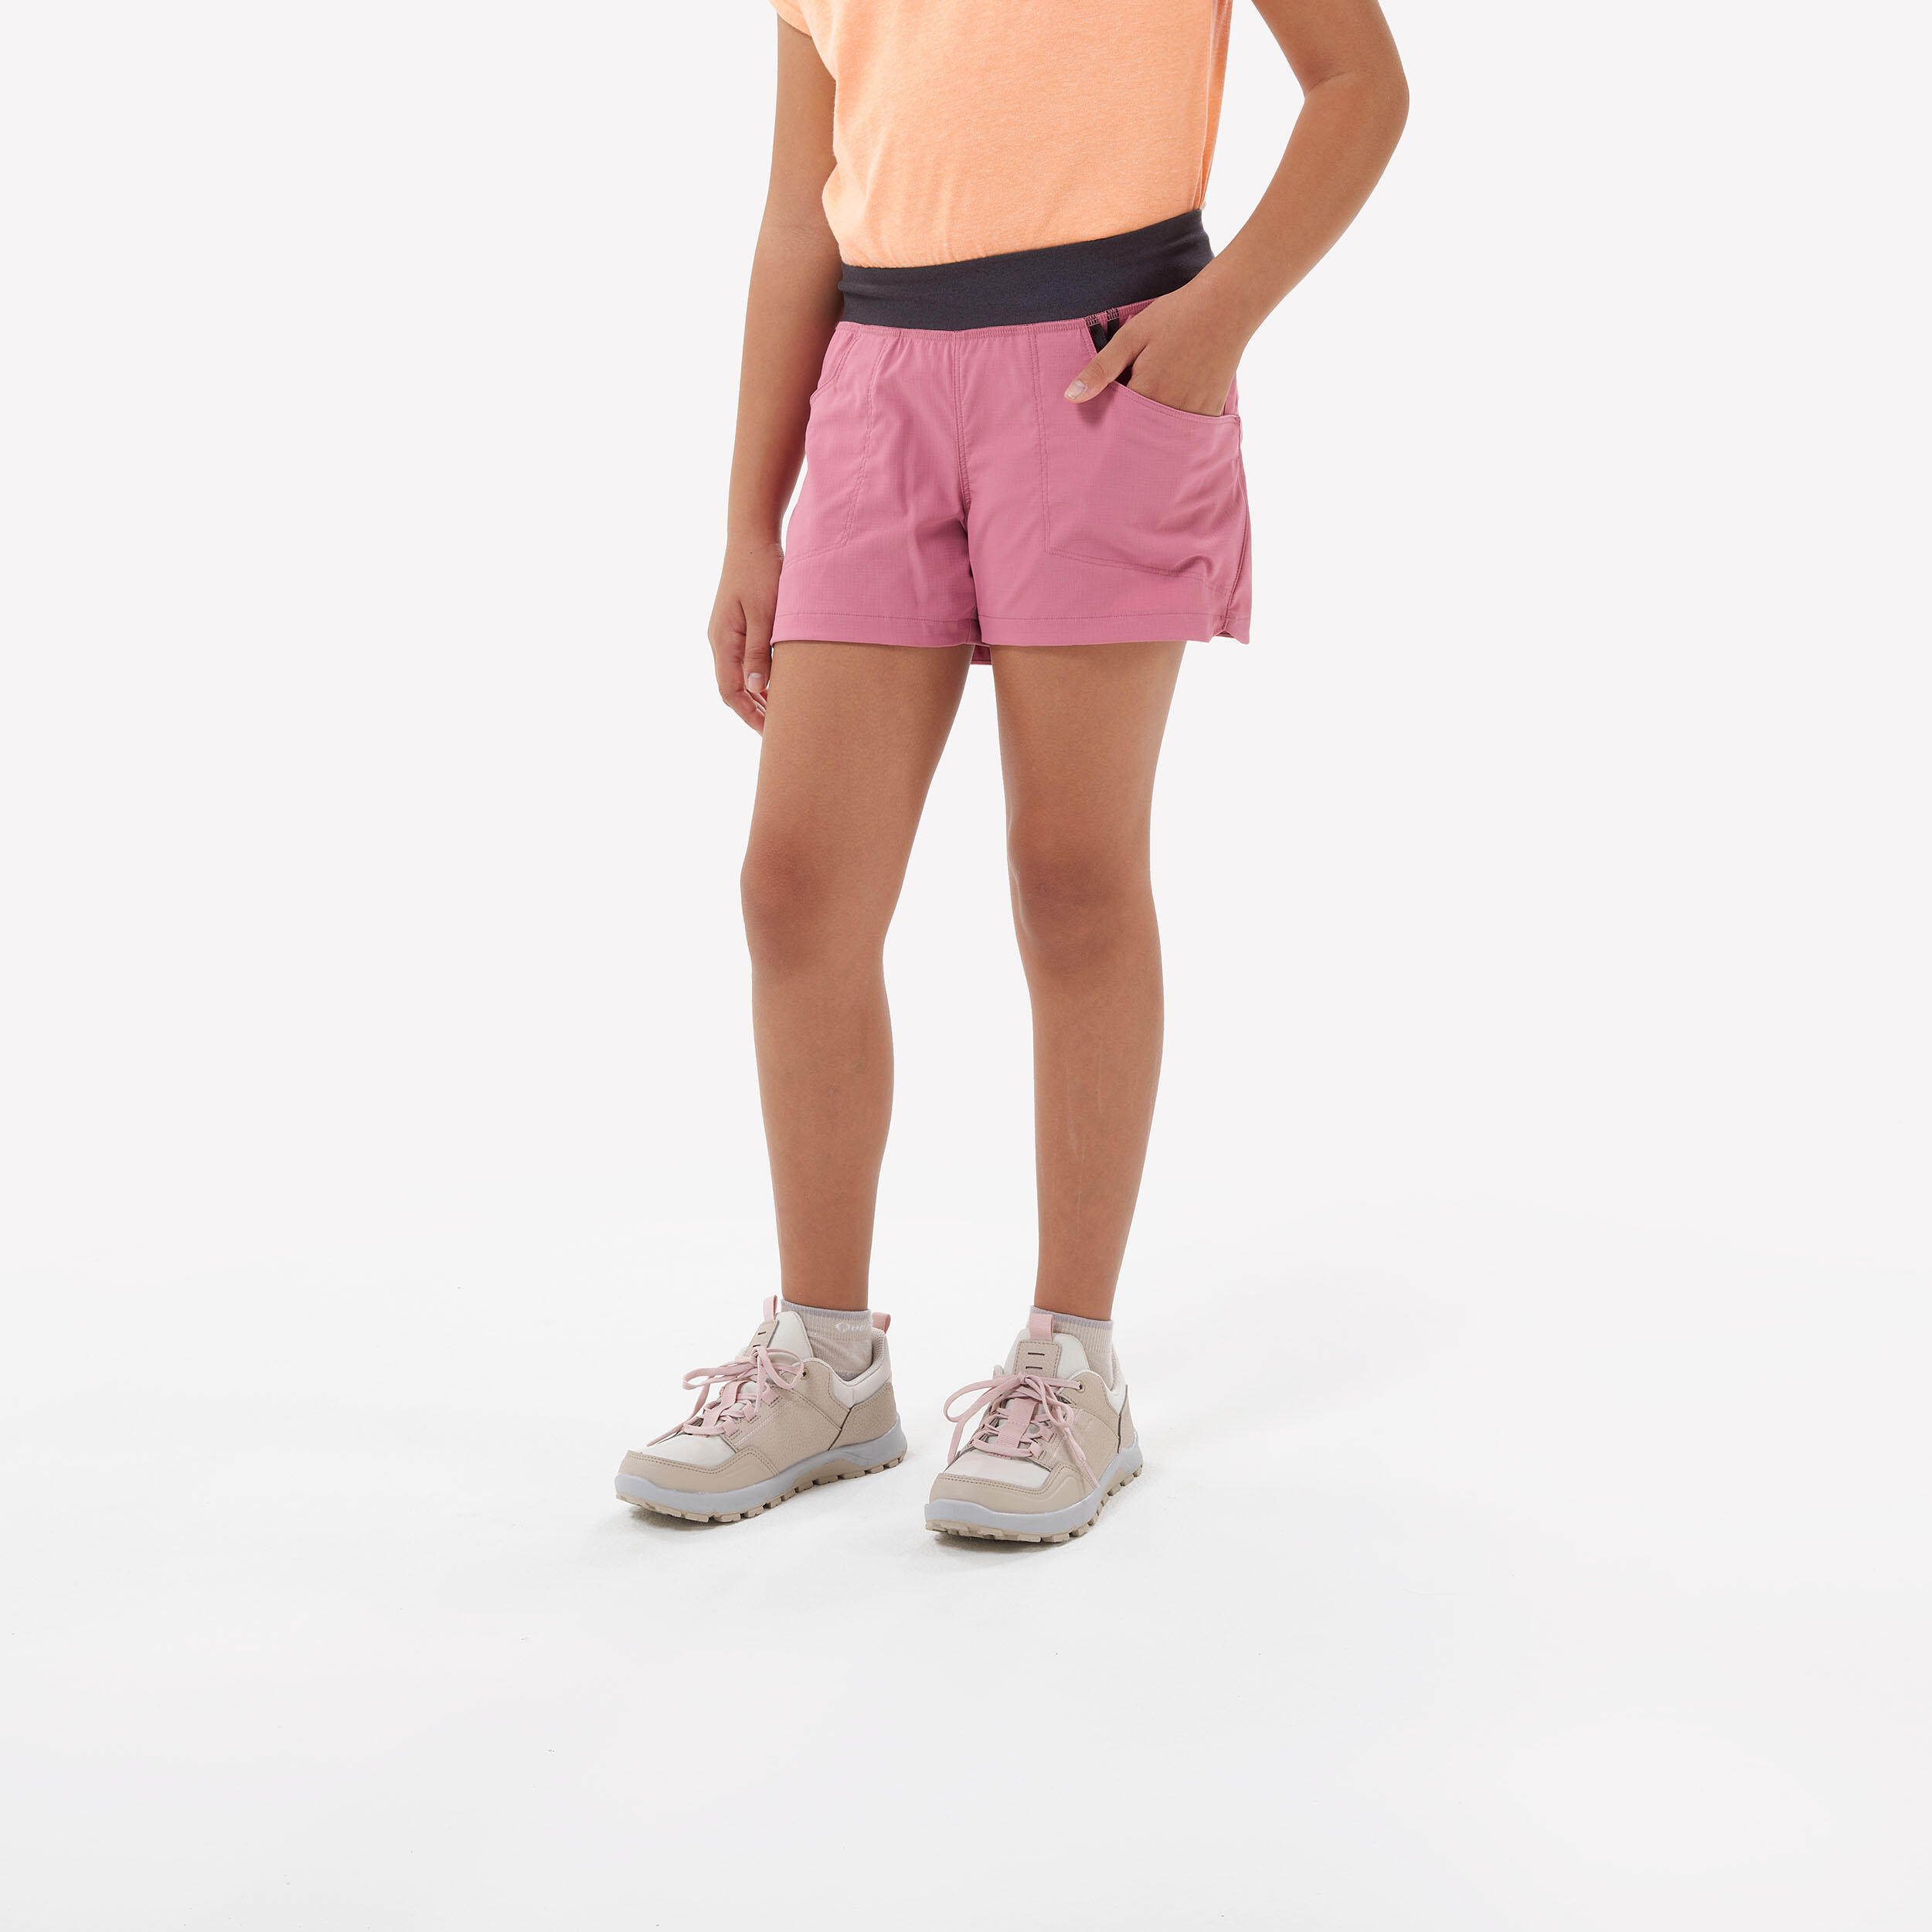 Kids’ Hiking Shorts - MH500 Ages 7-15 - Pink 1/9